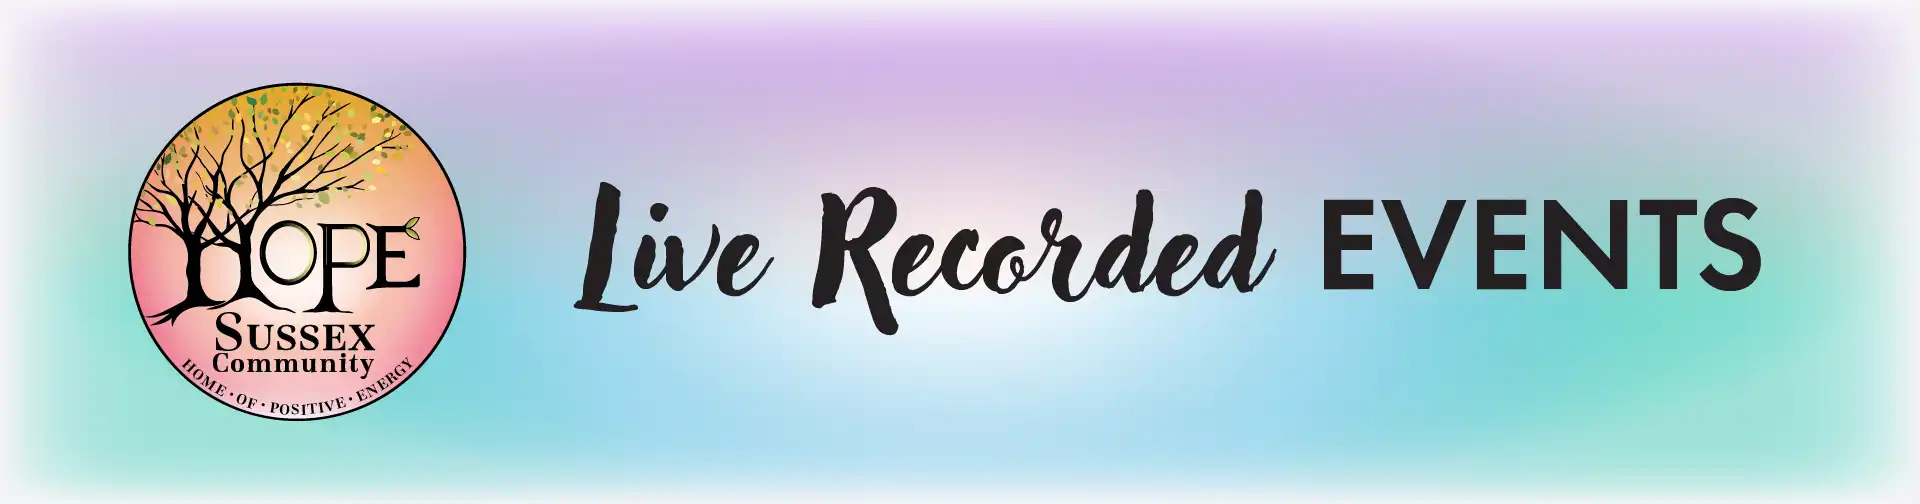 Live Recorded Events